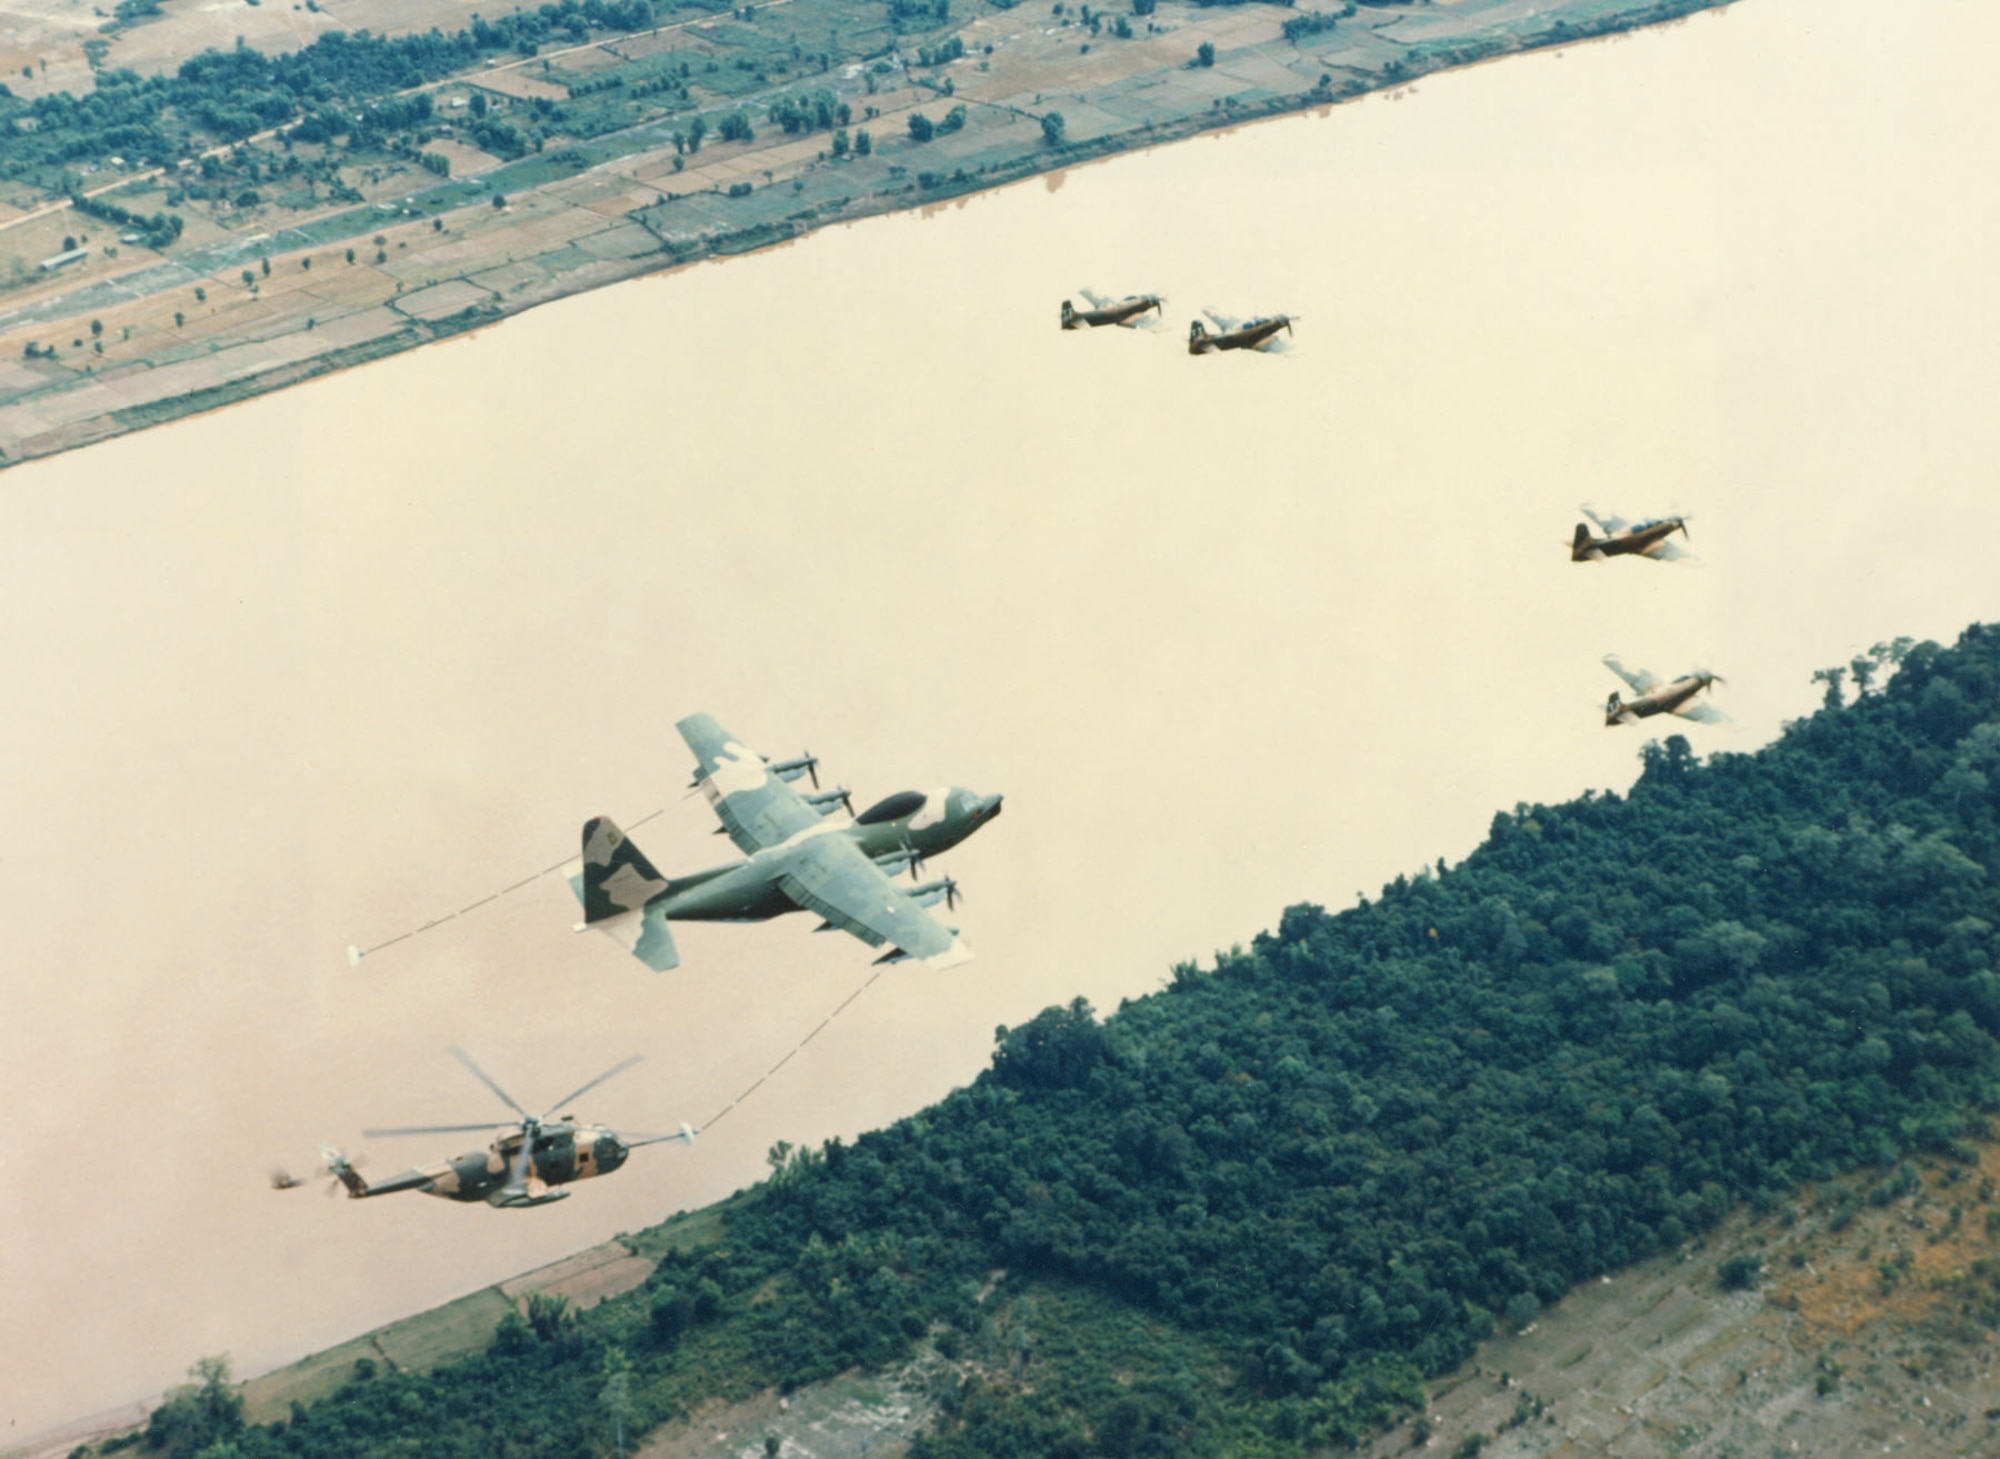 By 1968, typical USAF combat rescue packages included strike aircraft, aerial refuelers and rescue helicopters. (U.S. Air Force photo)